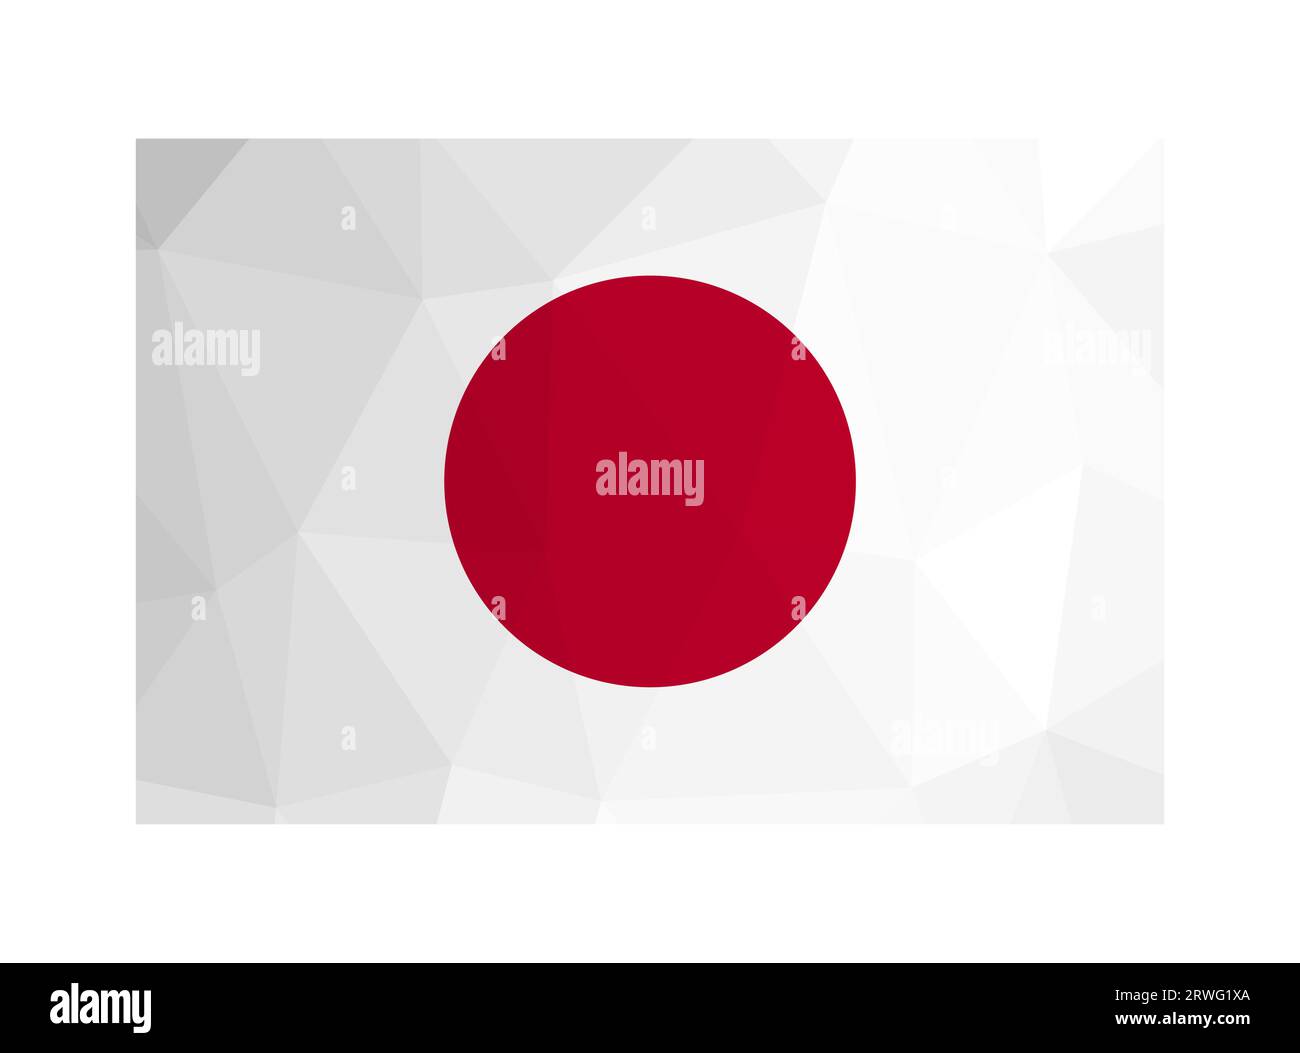 Vector isolated illustration. National Japanese flag with white background, red circle. Official symbol of Japan - Hinomaru. Creative design in low po Stock Vector